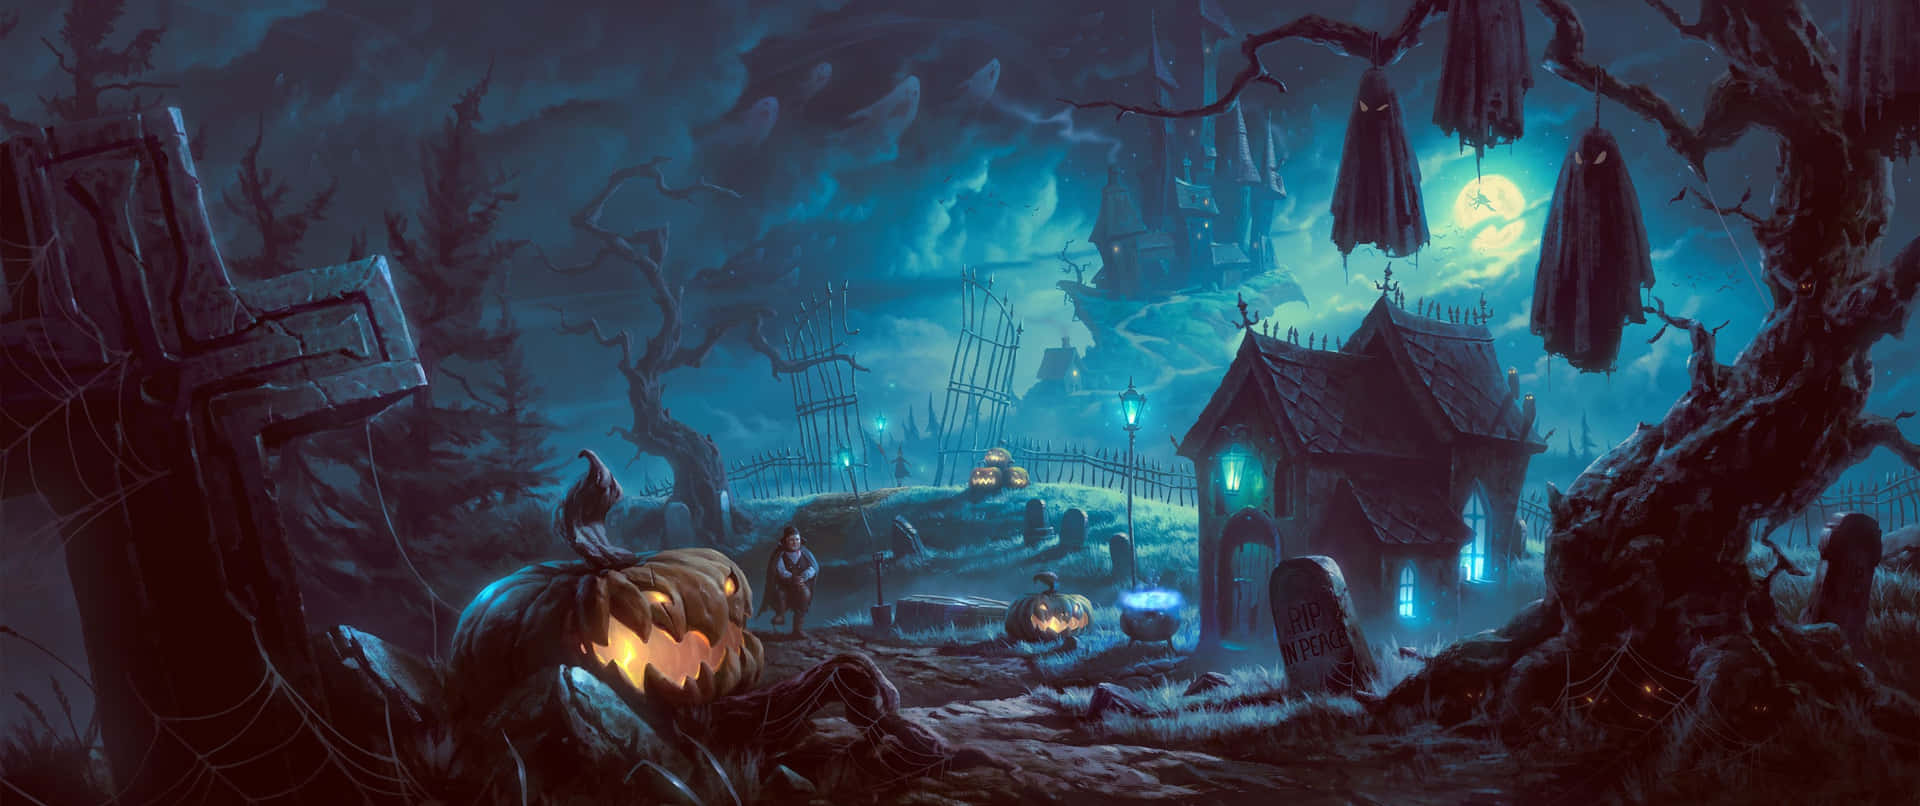 This spooky desktop wallpaper will get you in the mood for Halloween Wallpaper